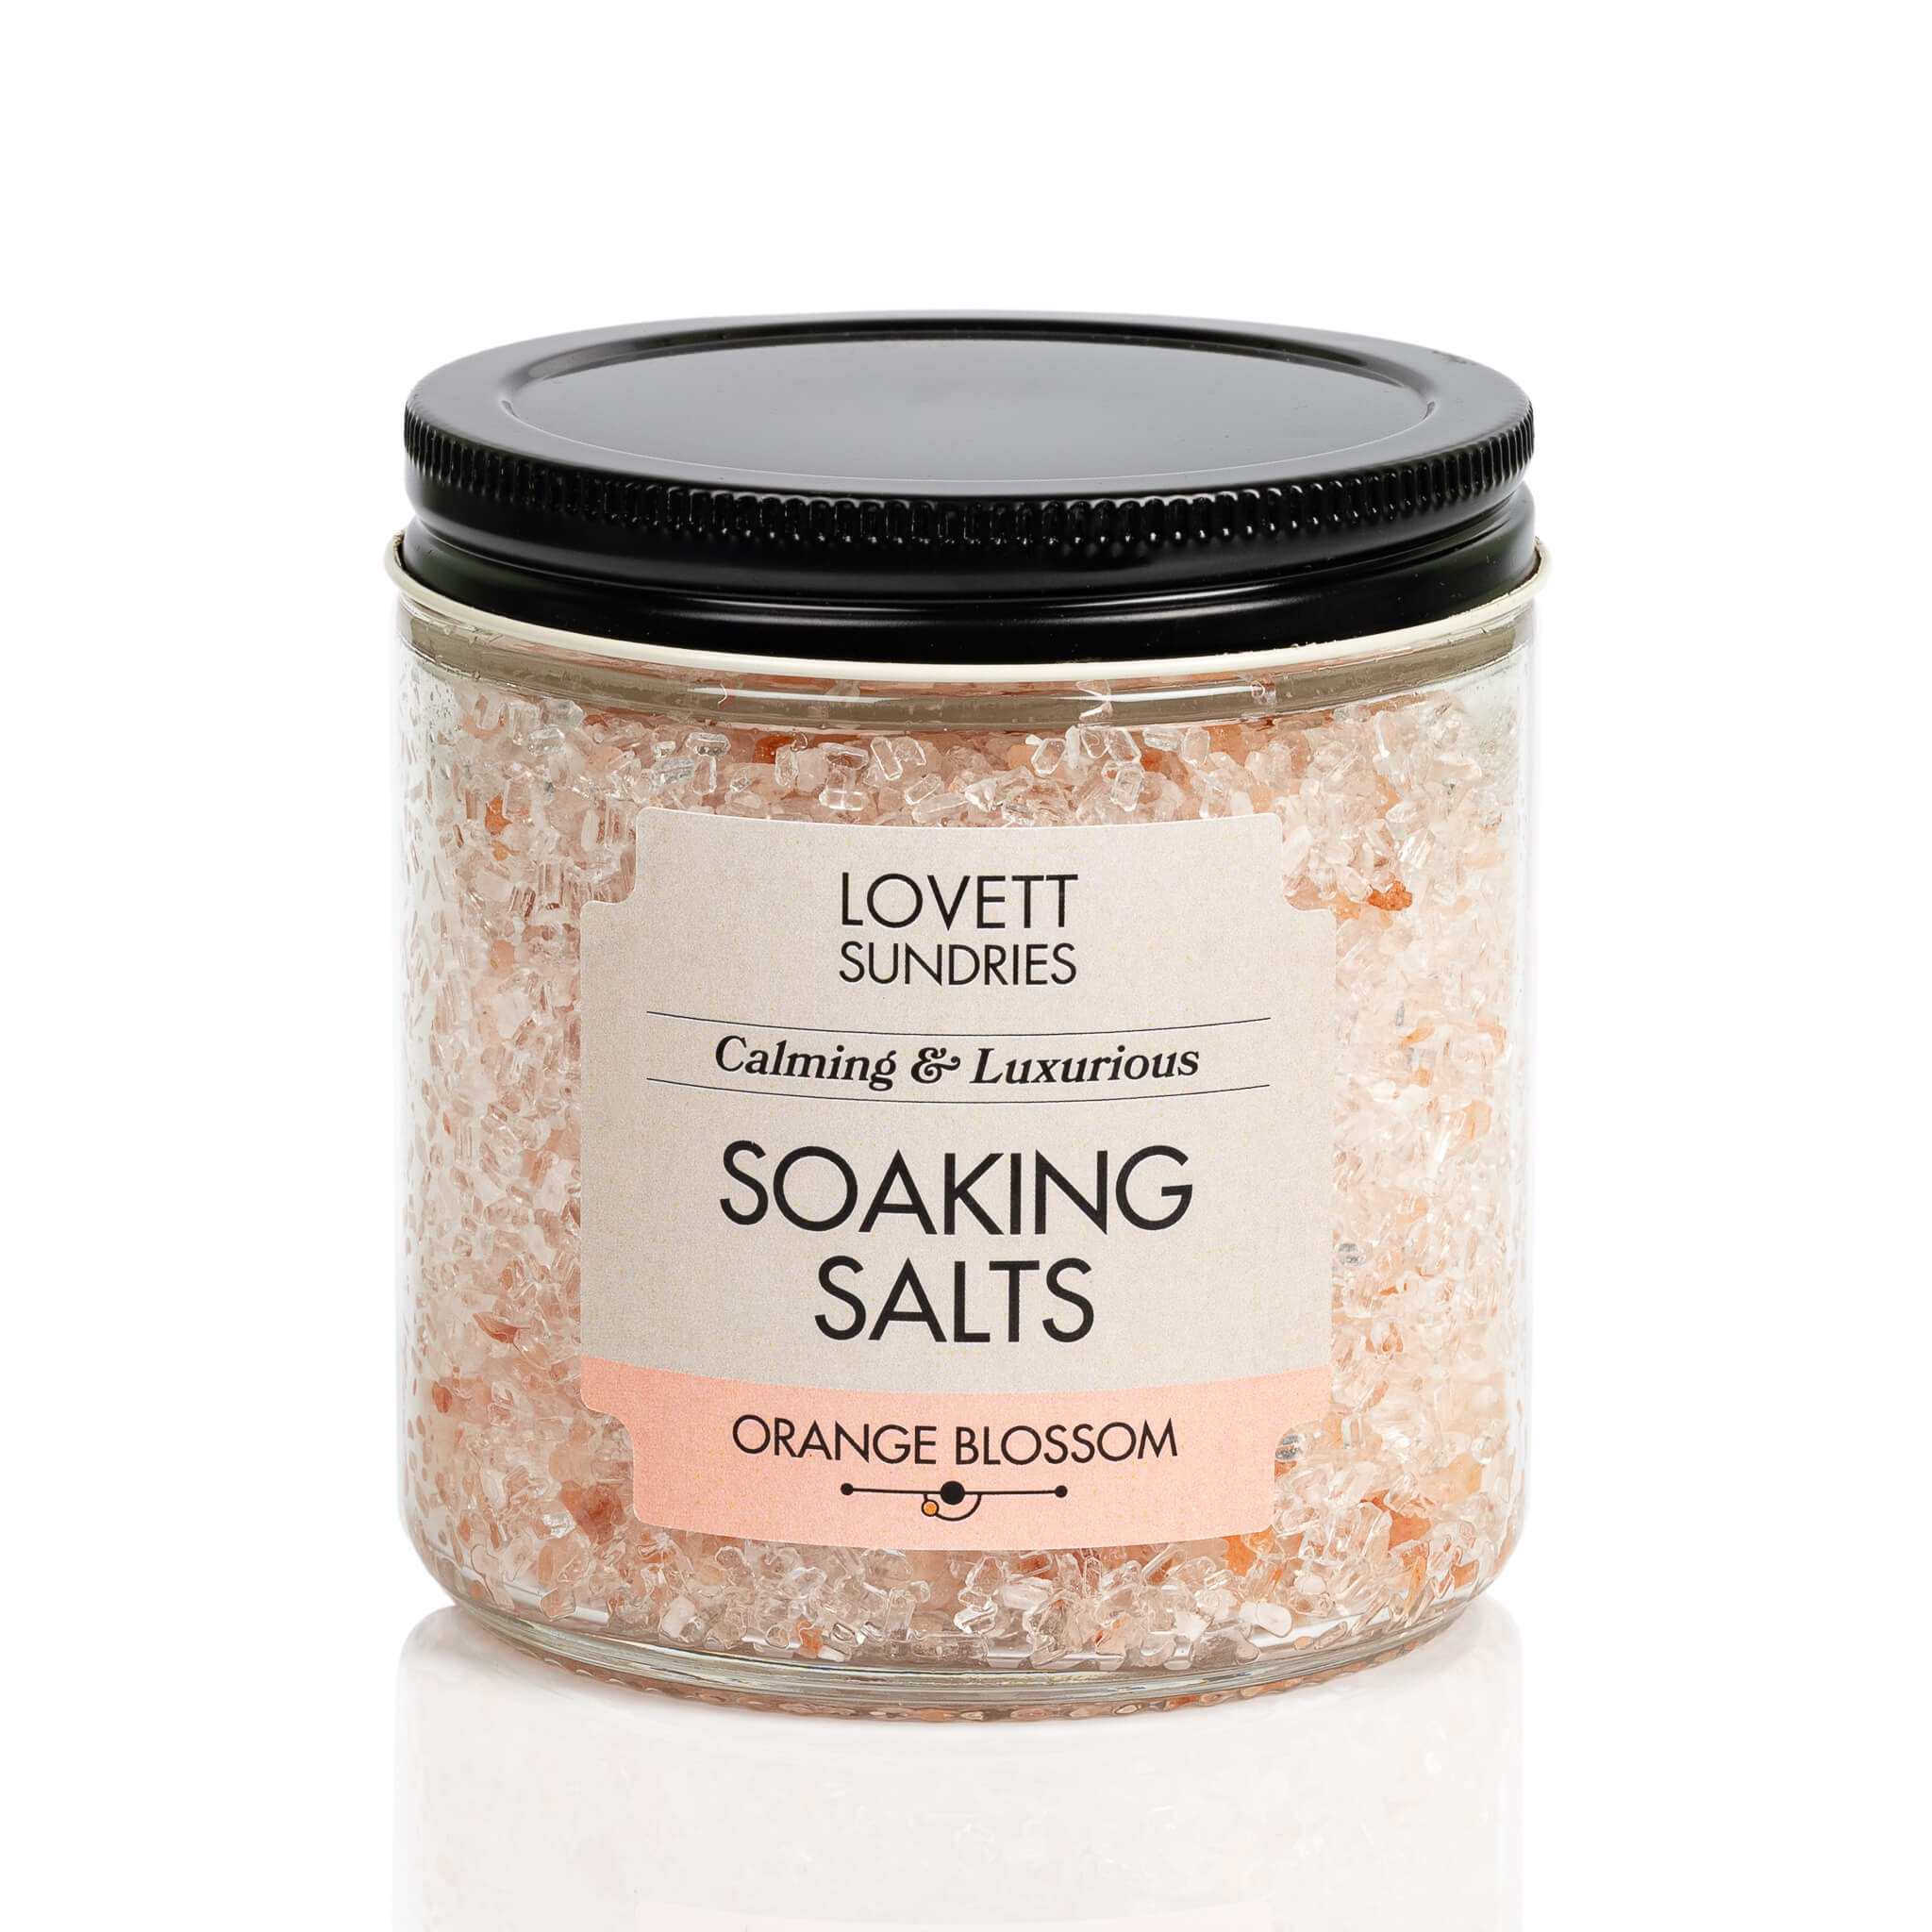 Orange blossom scented all natural calming and luxurious bath soaking salts in a recyclable glass jar. 